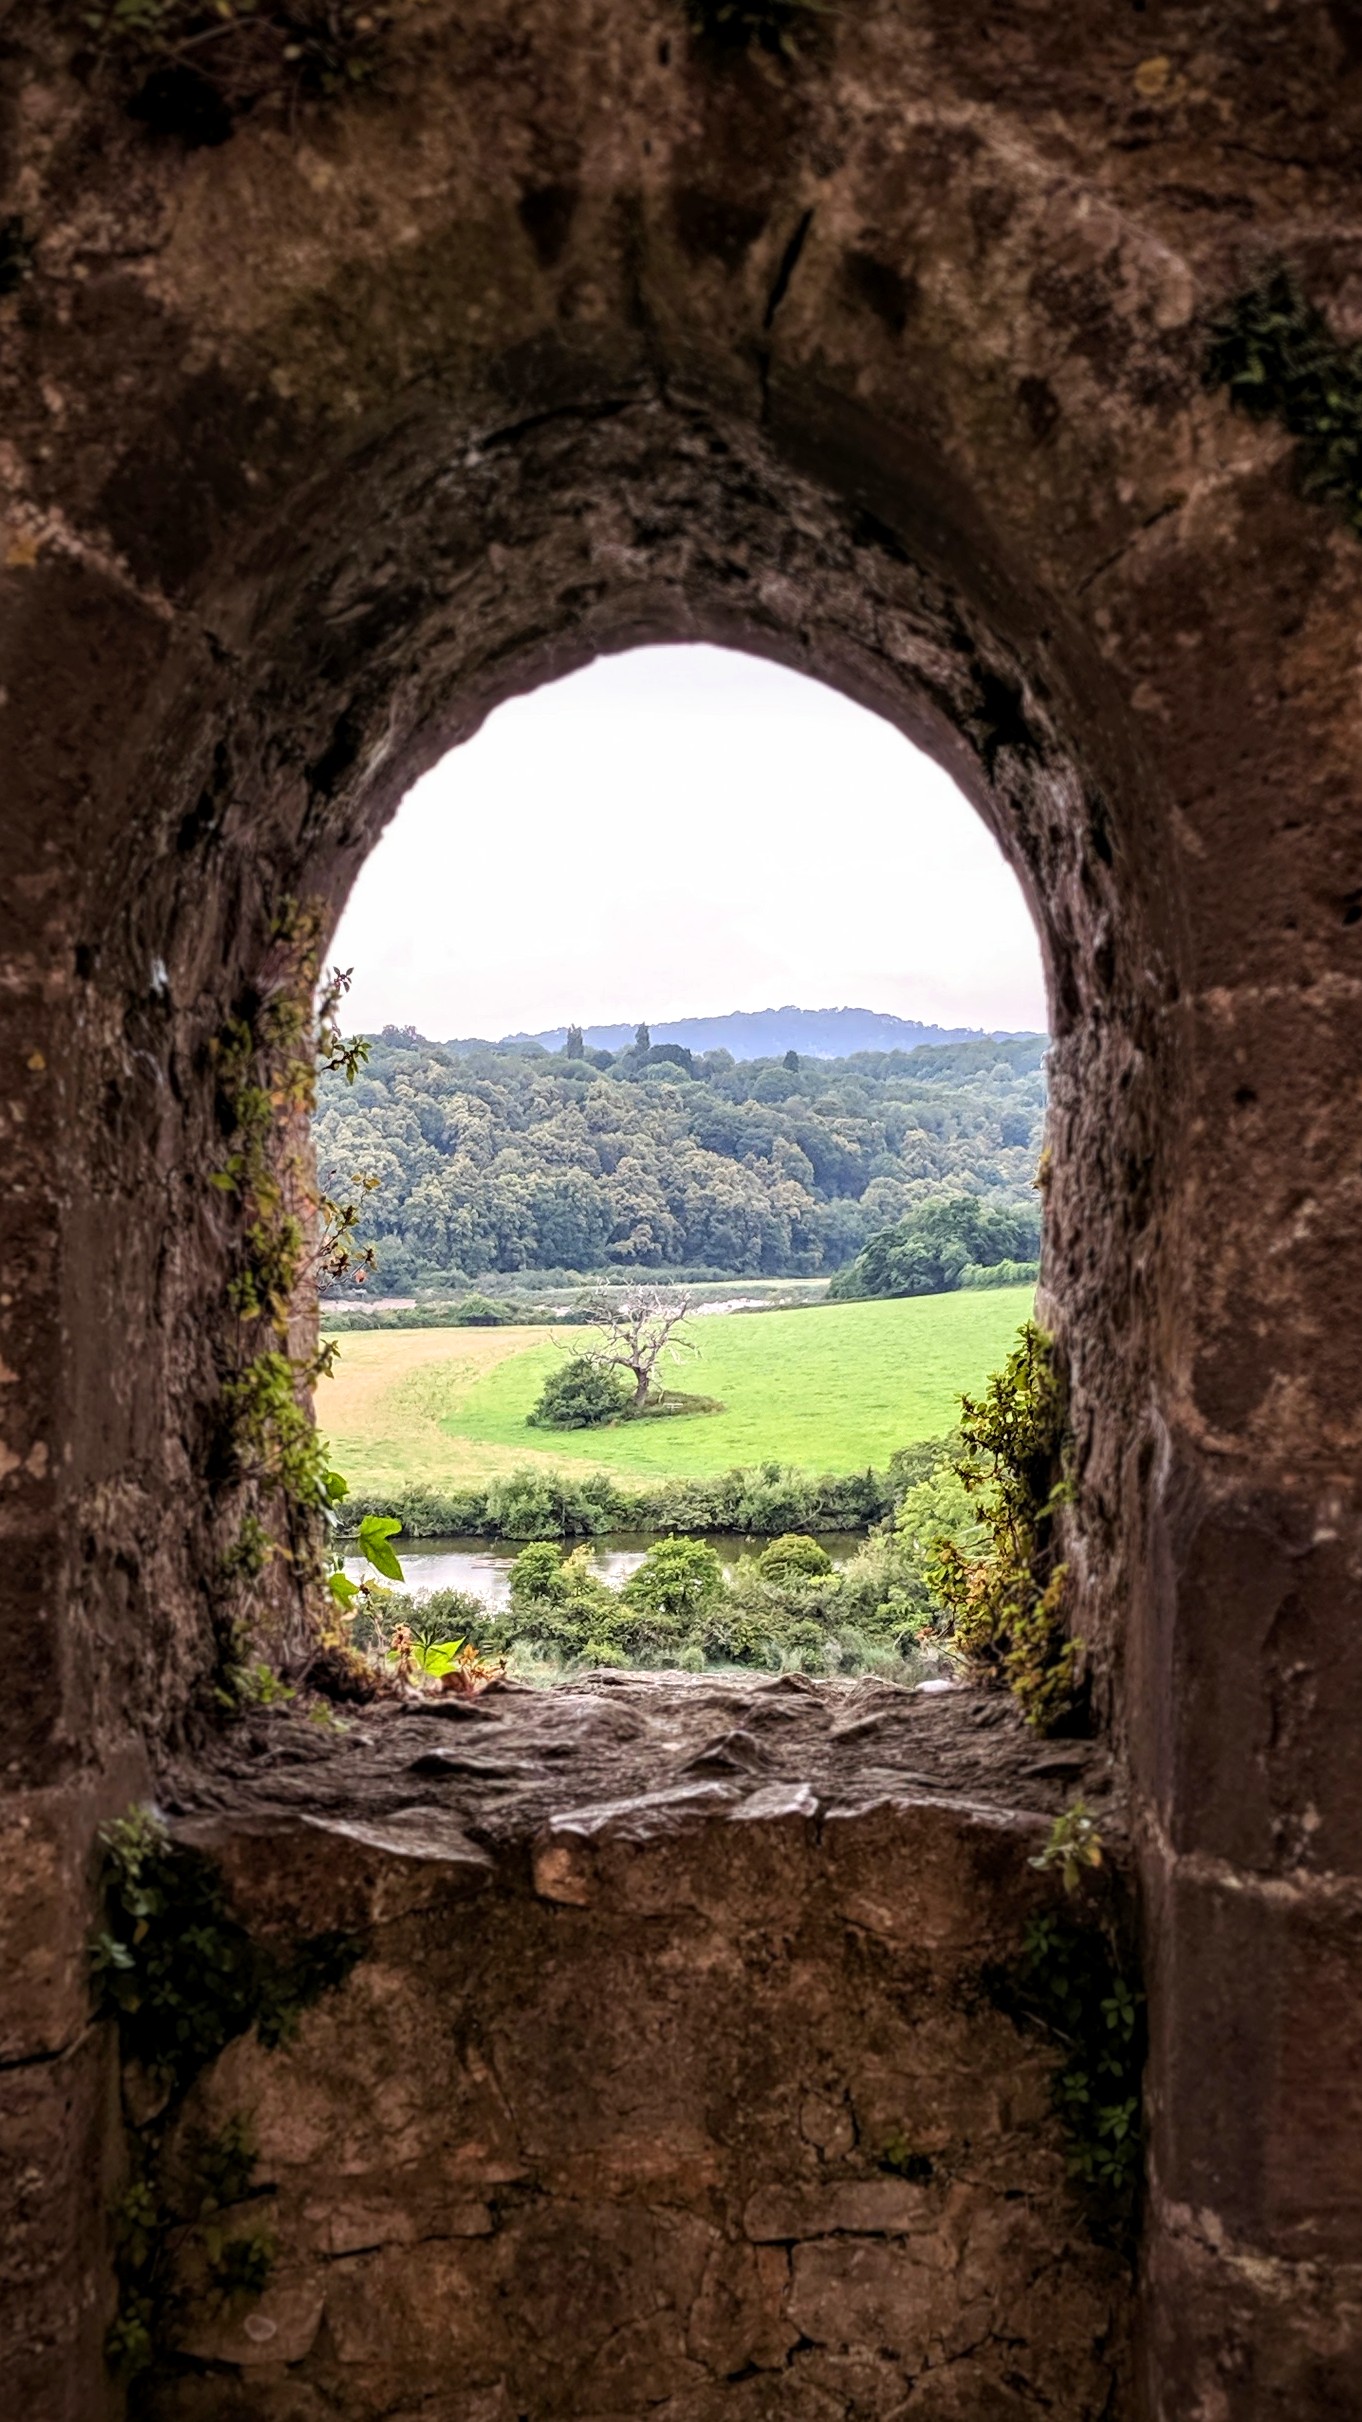 View from a Cheptsow Castle (Wales) window